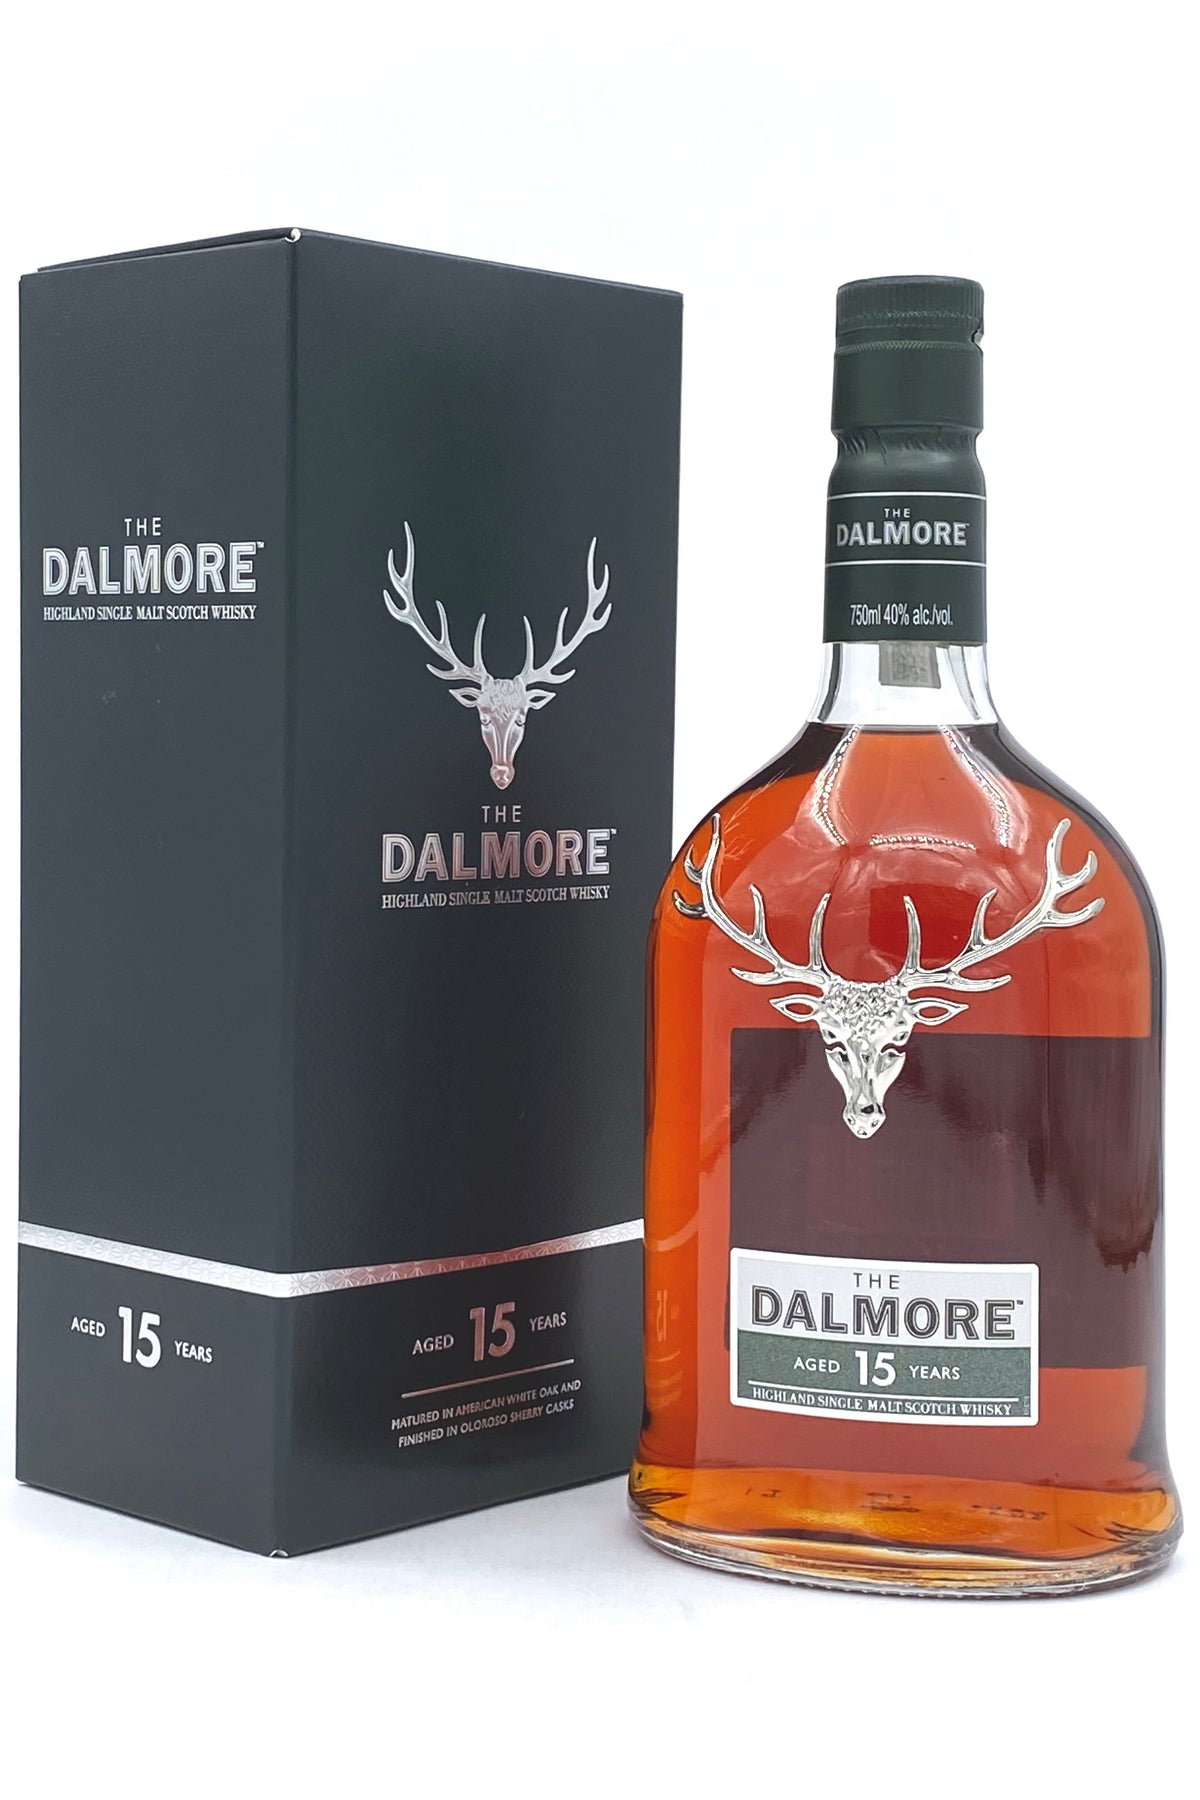 Dalmore 15 Year old Scotch Whisky